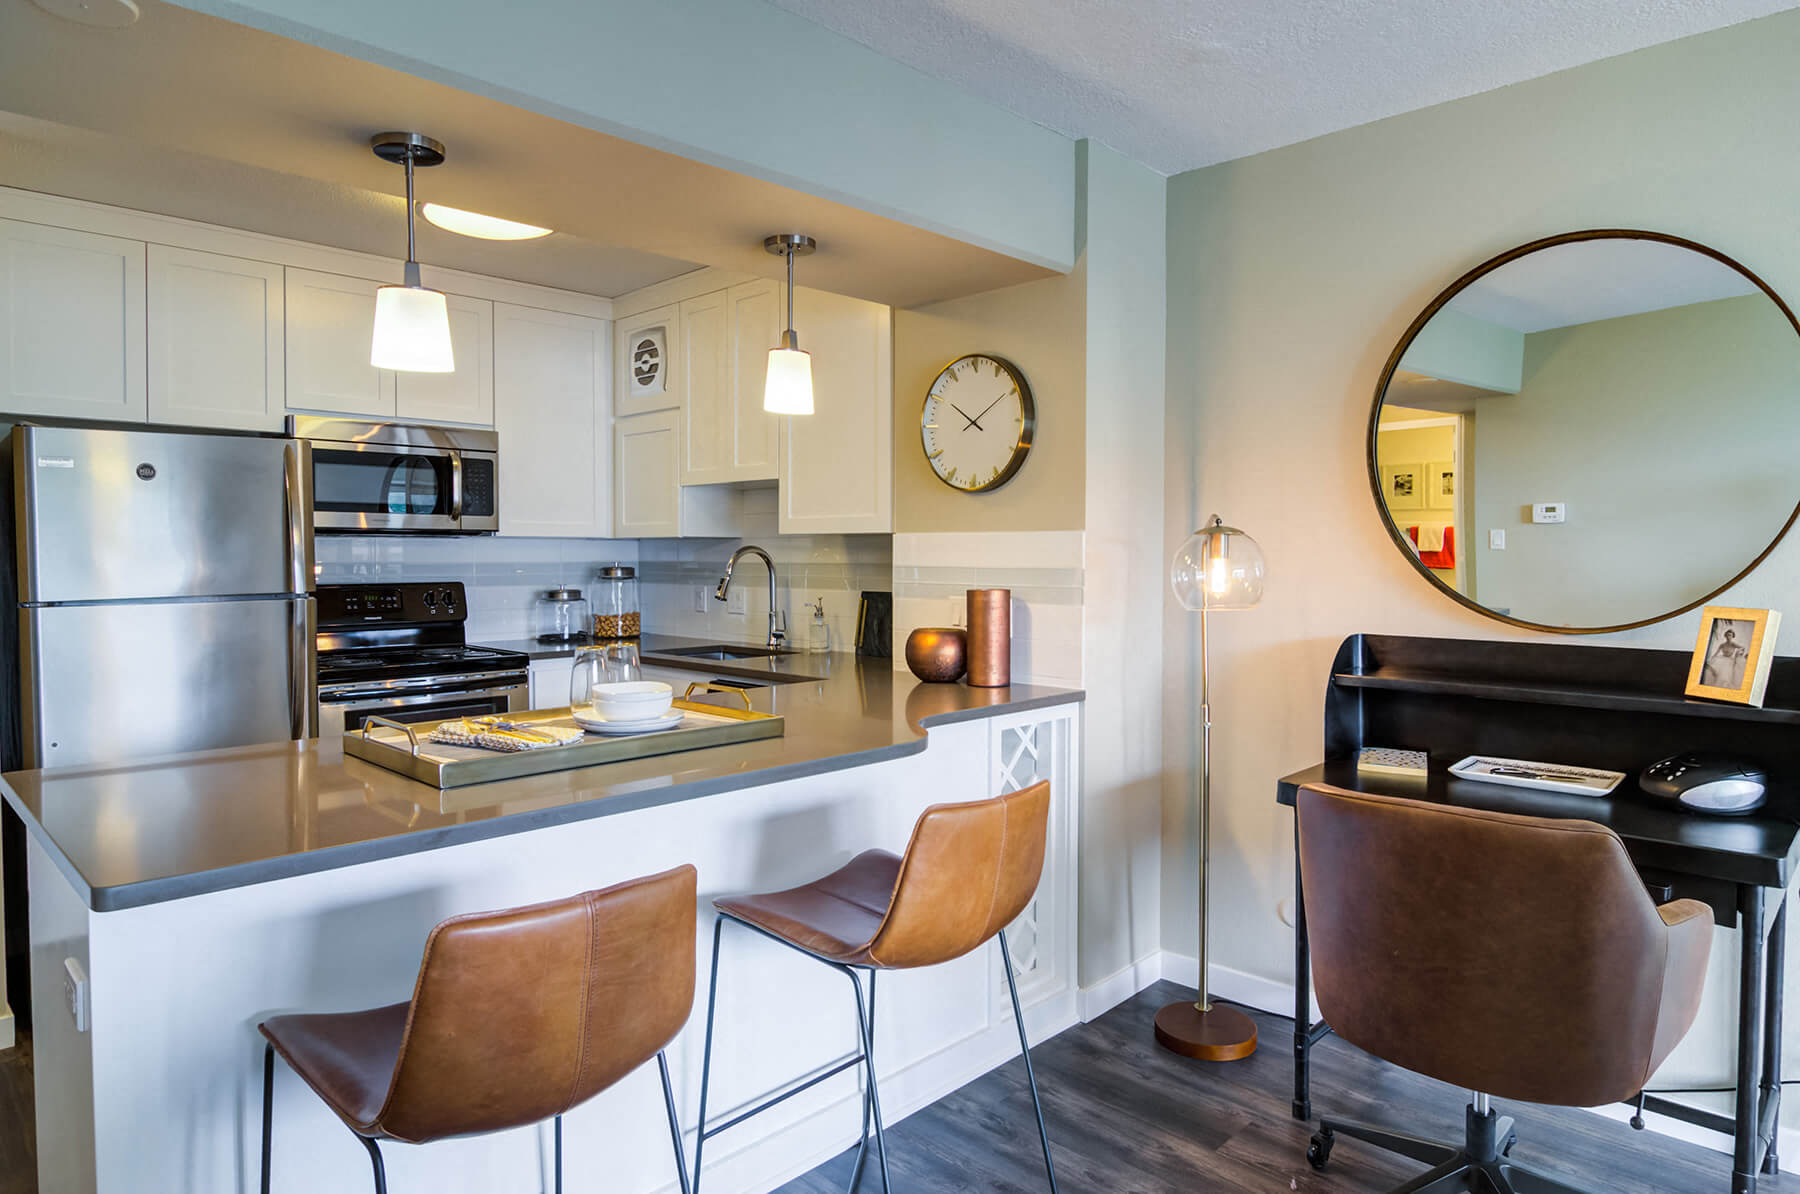 A modern kitchen and desk nook at the 735 St. Clair apartments in Portland, Oregon.